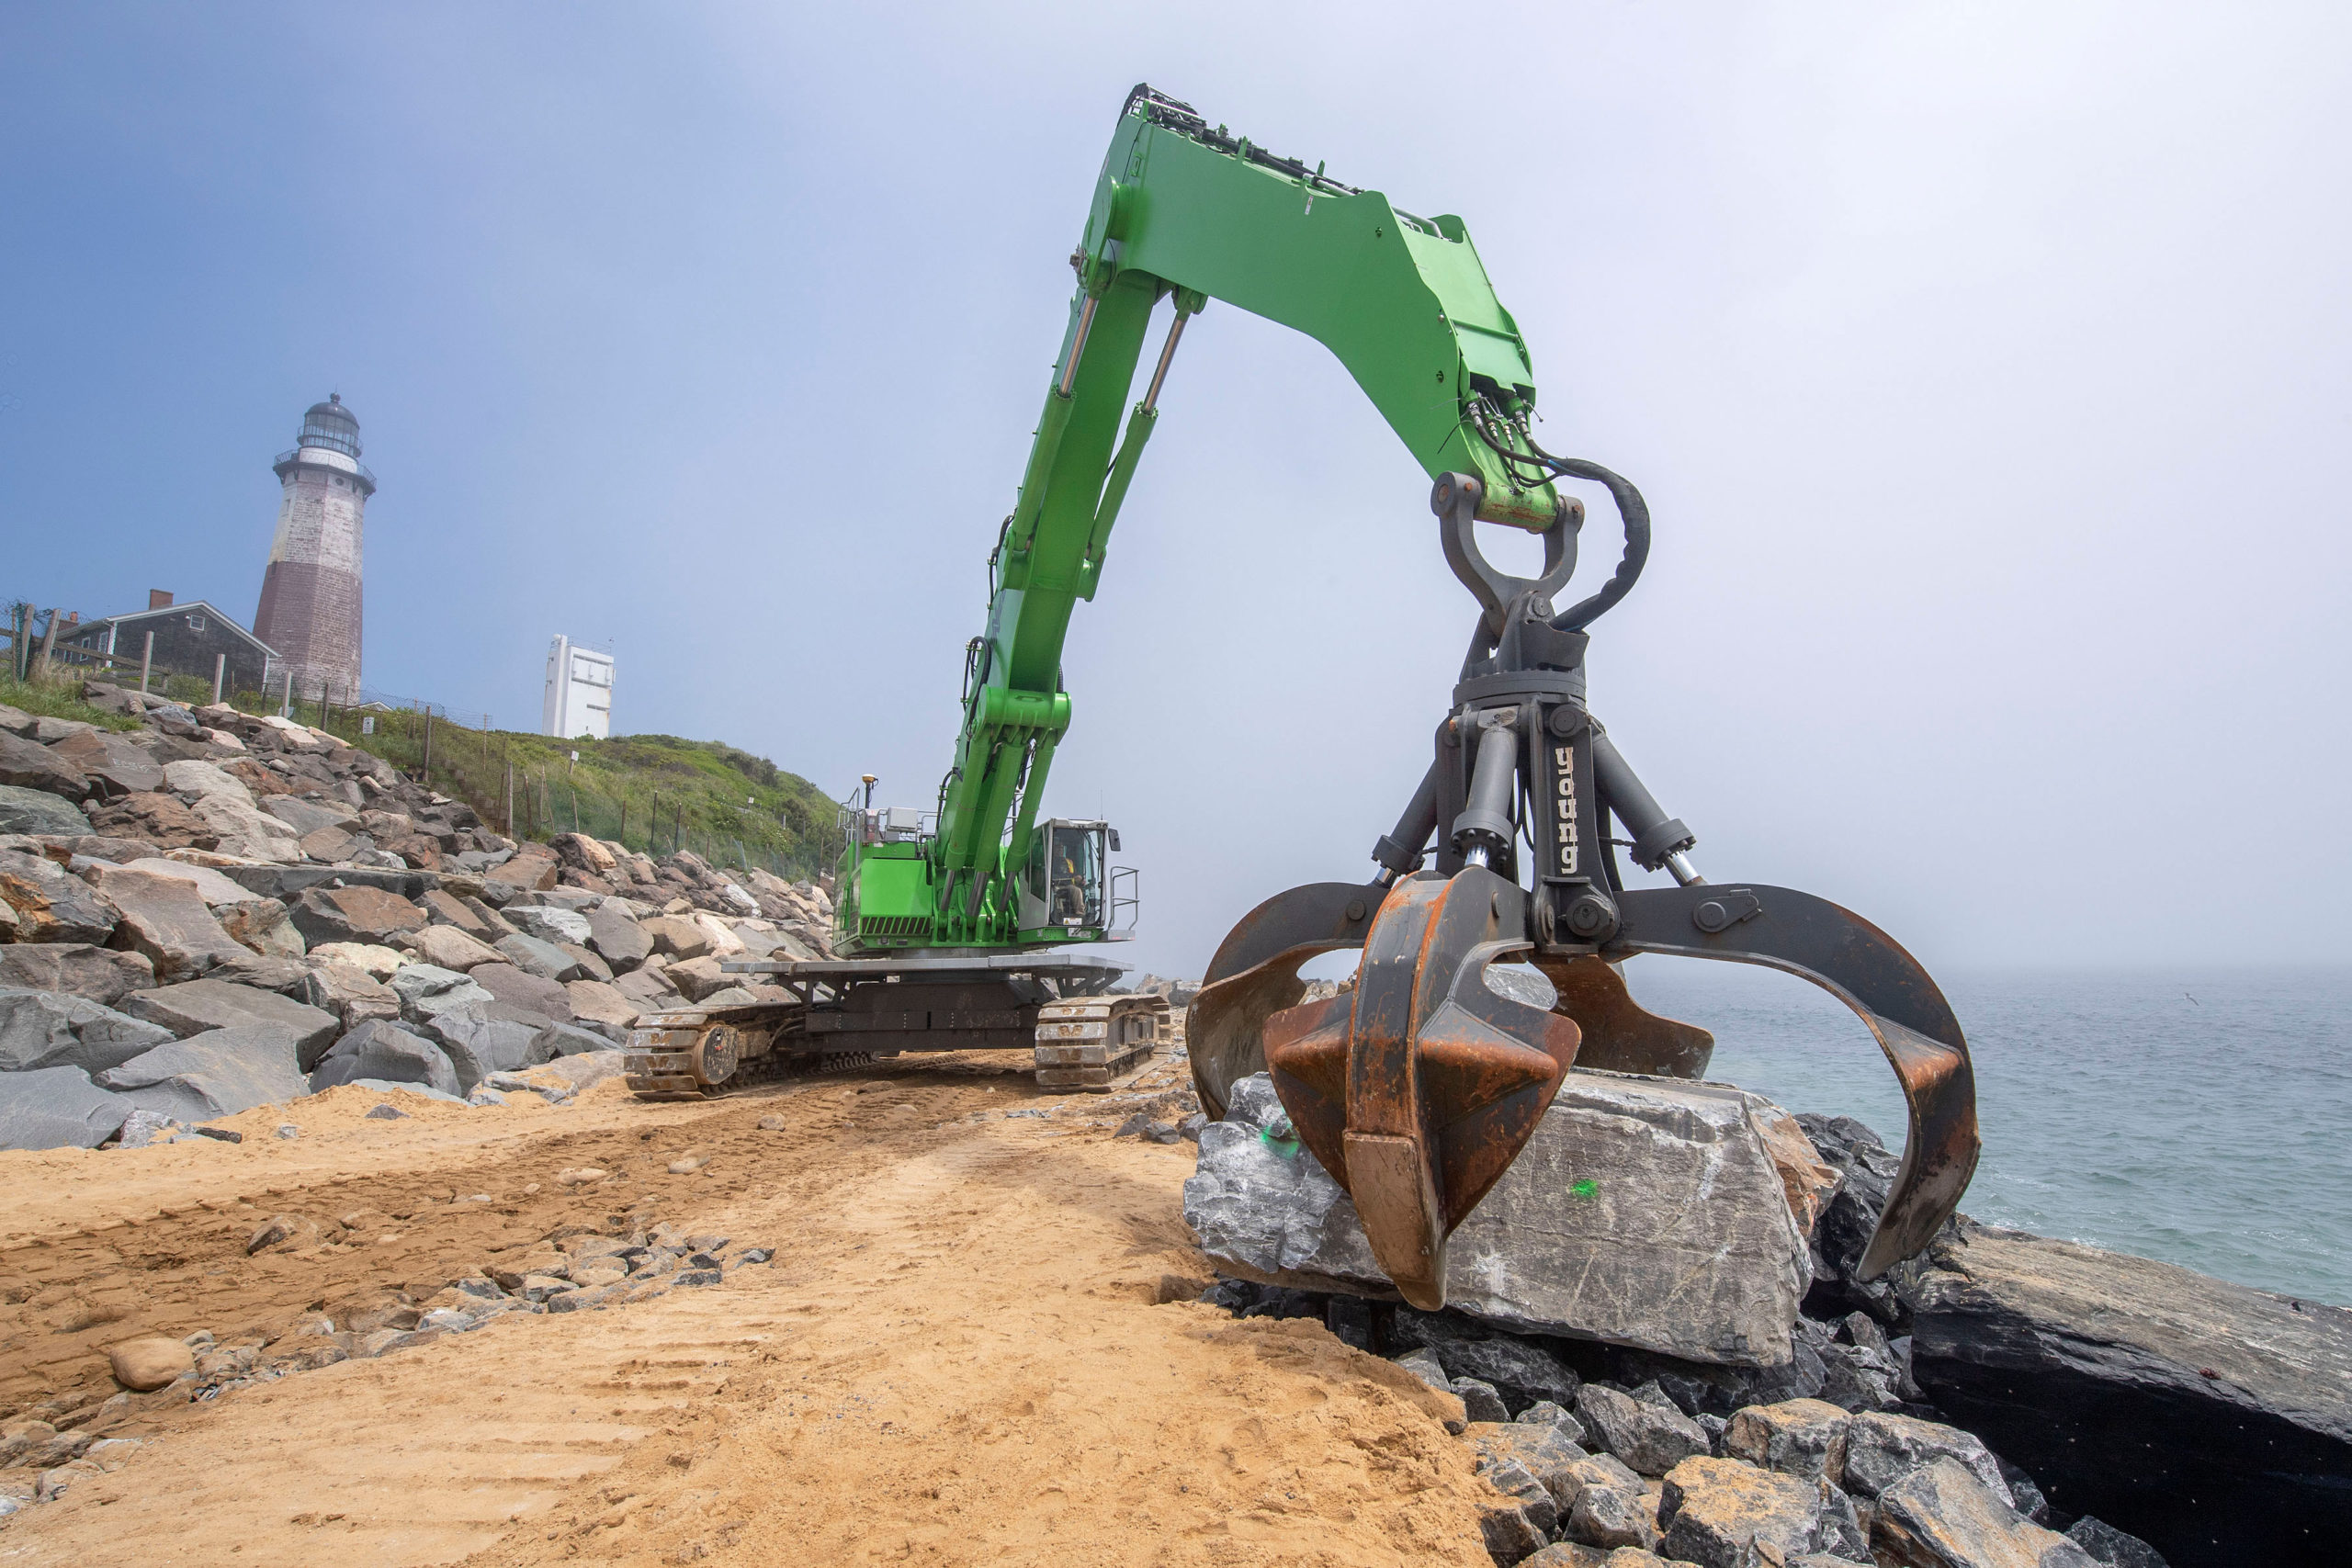 Large boulders - some as large as 15 tons - are moved by a large claw-tipped excavator after being transported from a quarry in upstate New York as part of the Army Corps of Engineers' Montauk Point Revetment Project on Monday.   MICHAEL HELLER